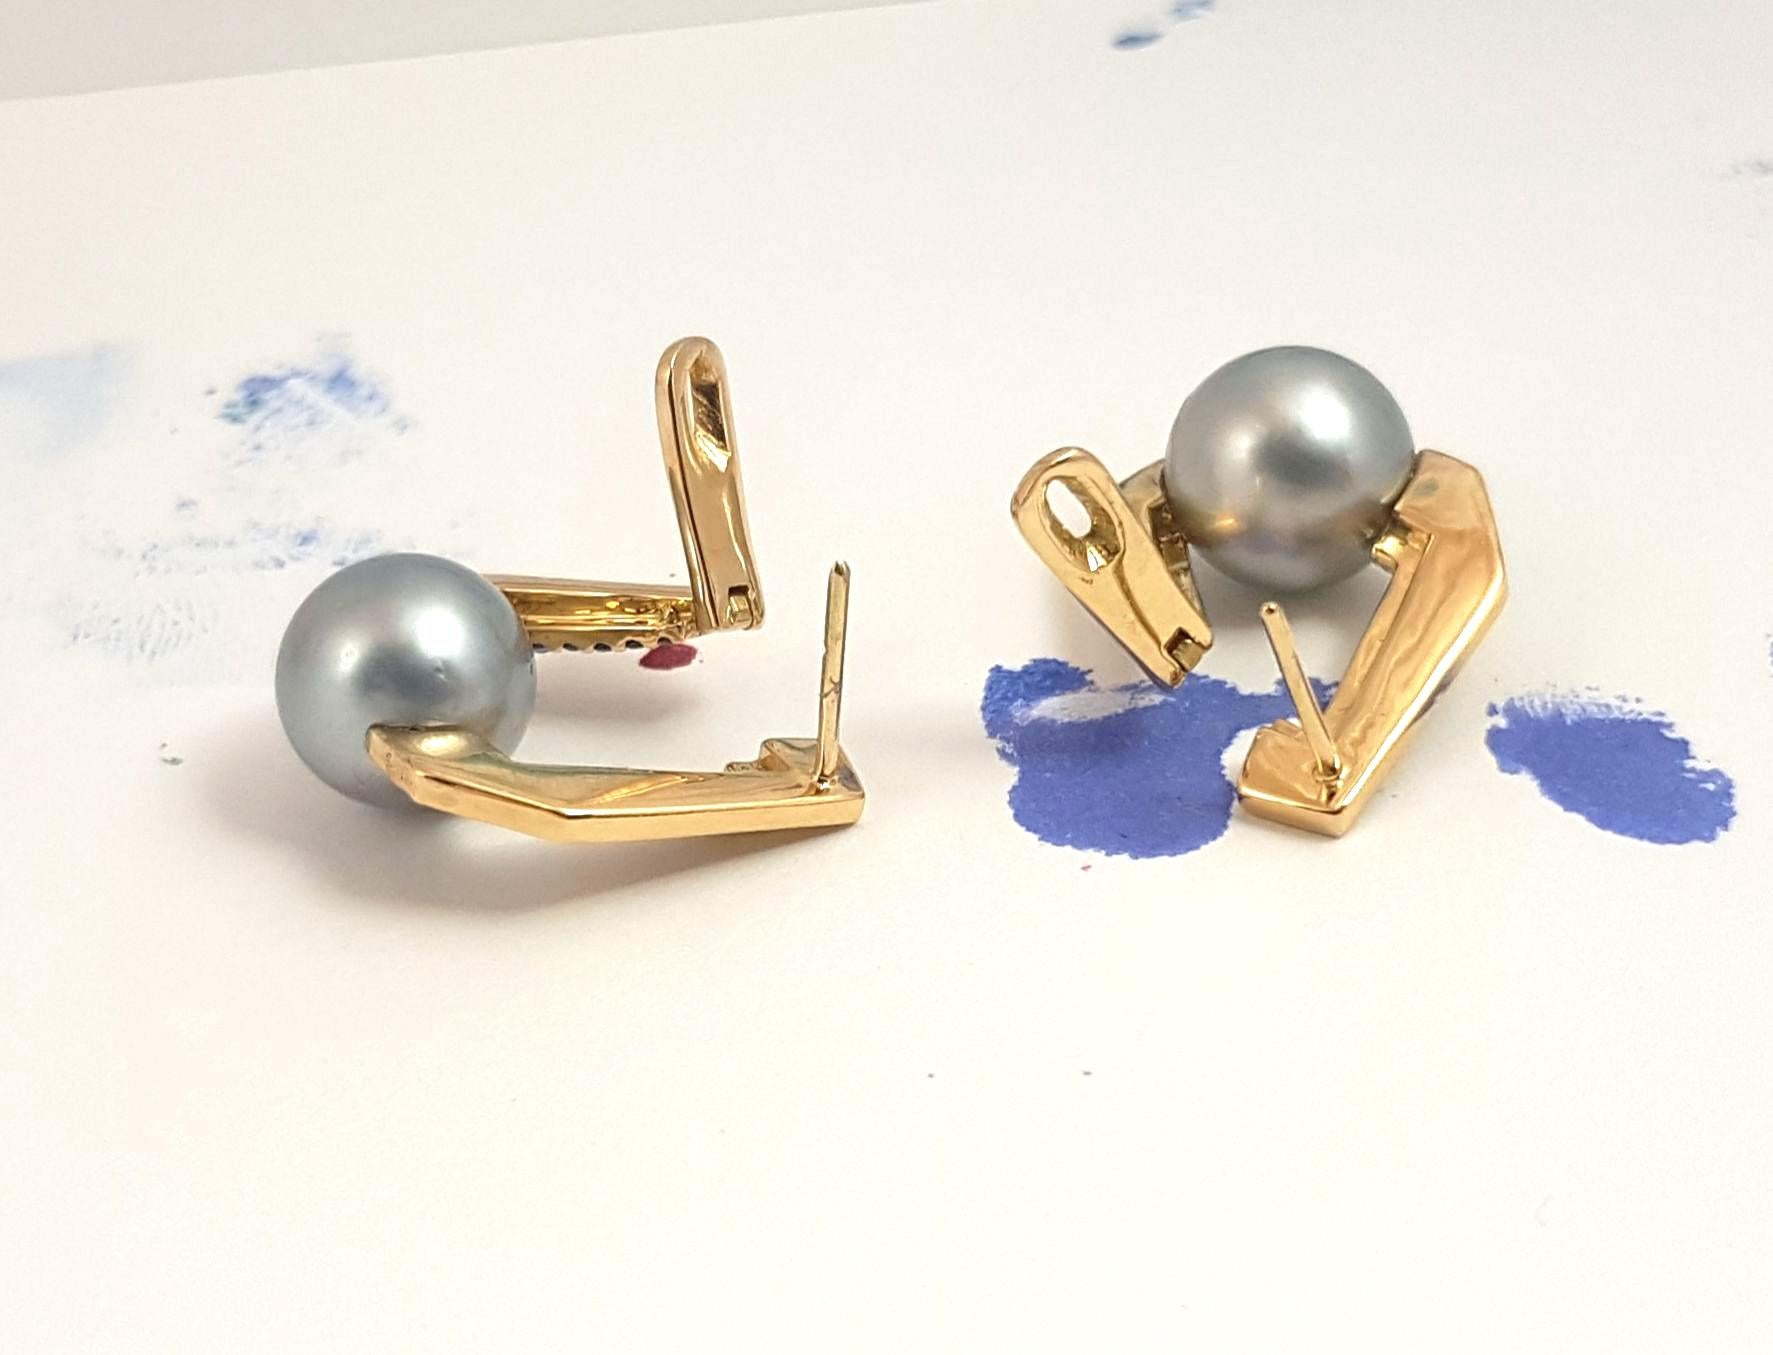 Origami Link no. 5 South Sea Pearl with Blue Sapphire Earrings set in 18K Gold 2